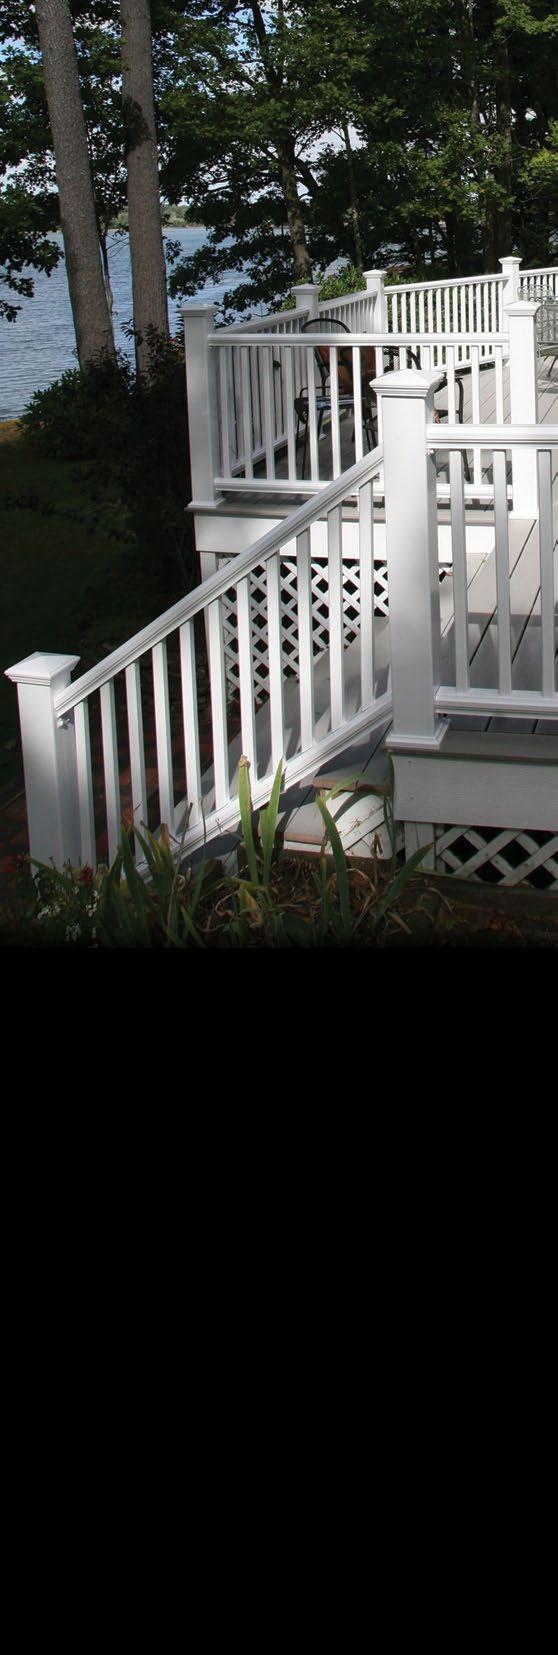 Accessories Matching Post Caps and Collars Finish your railing